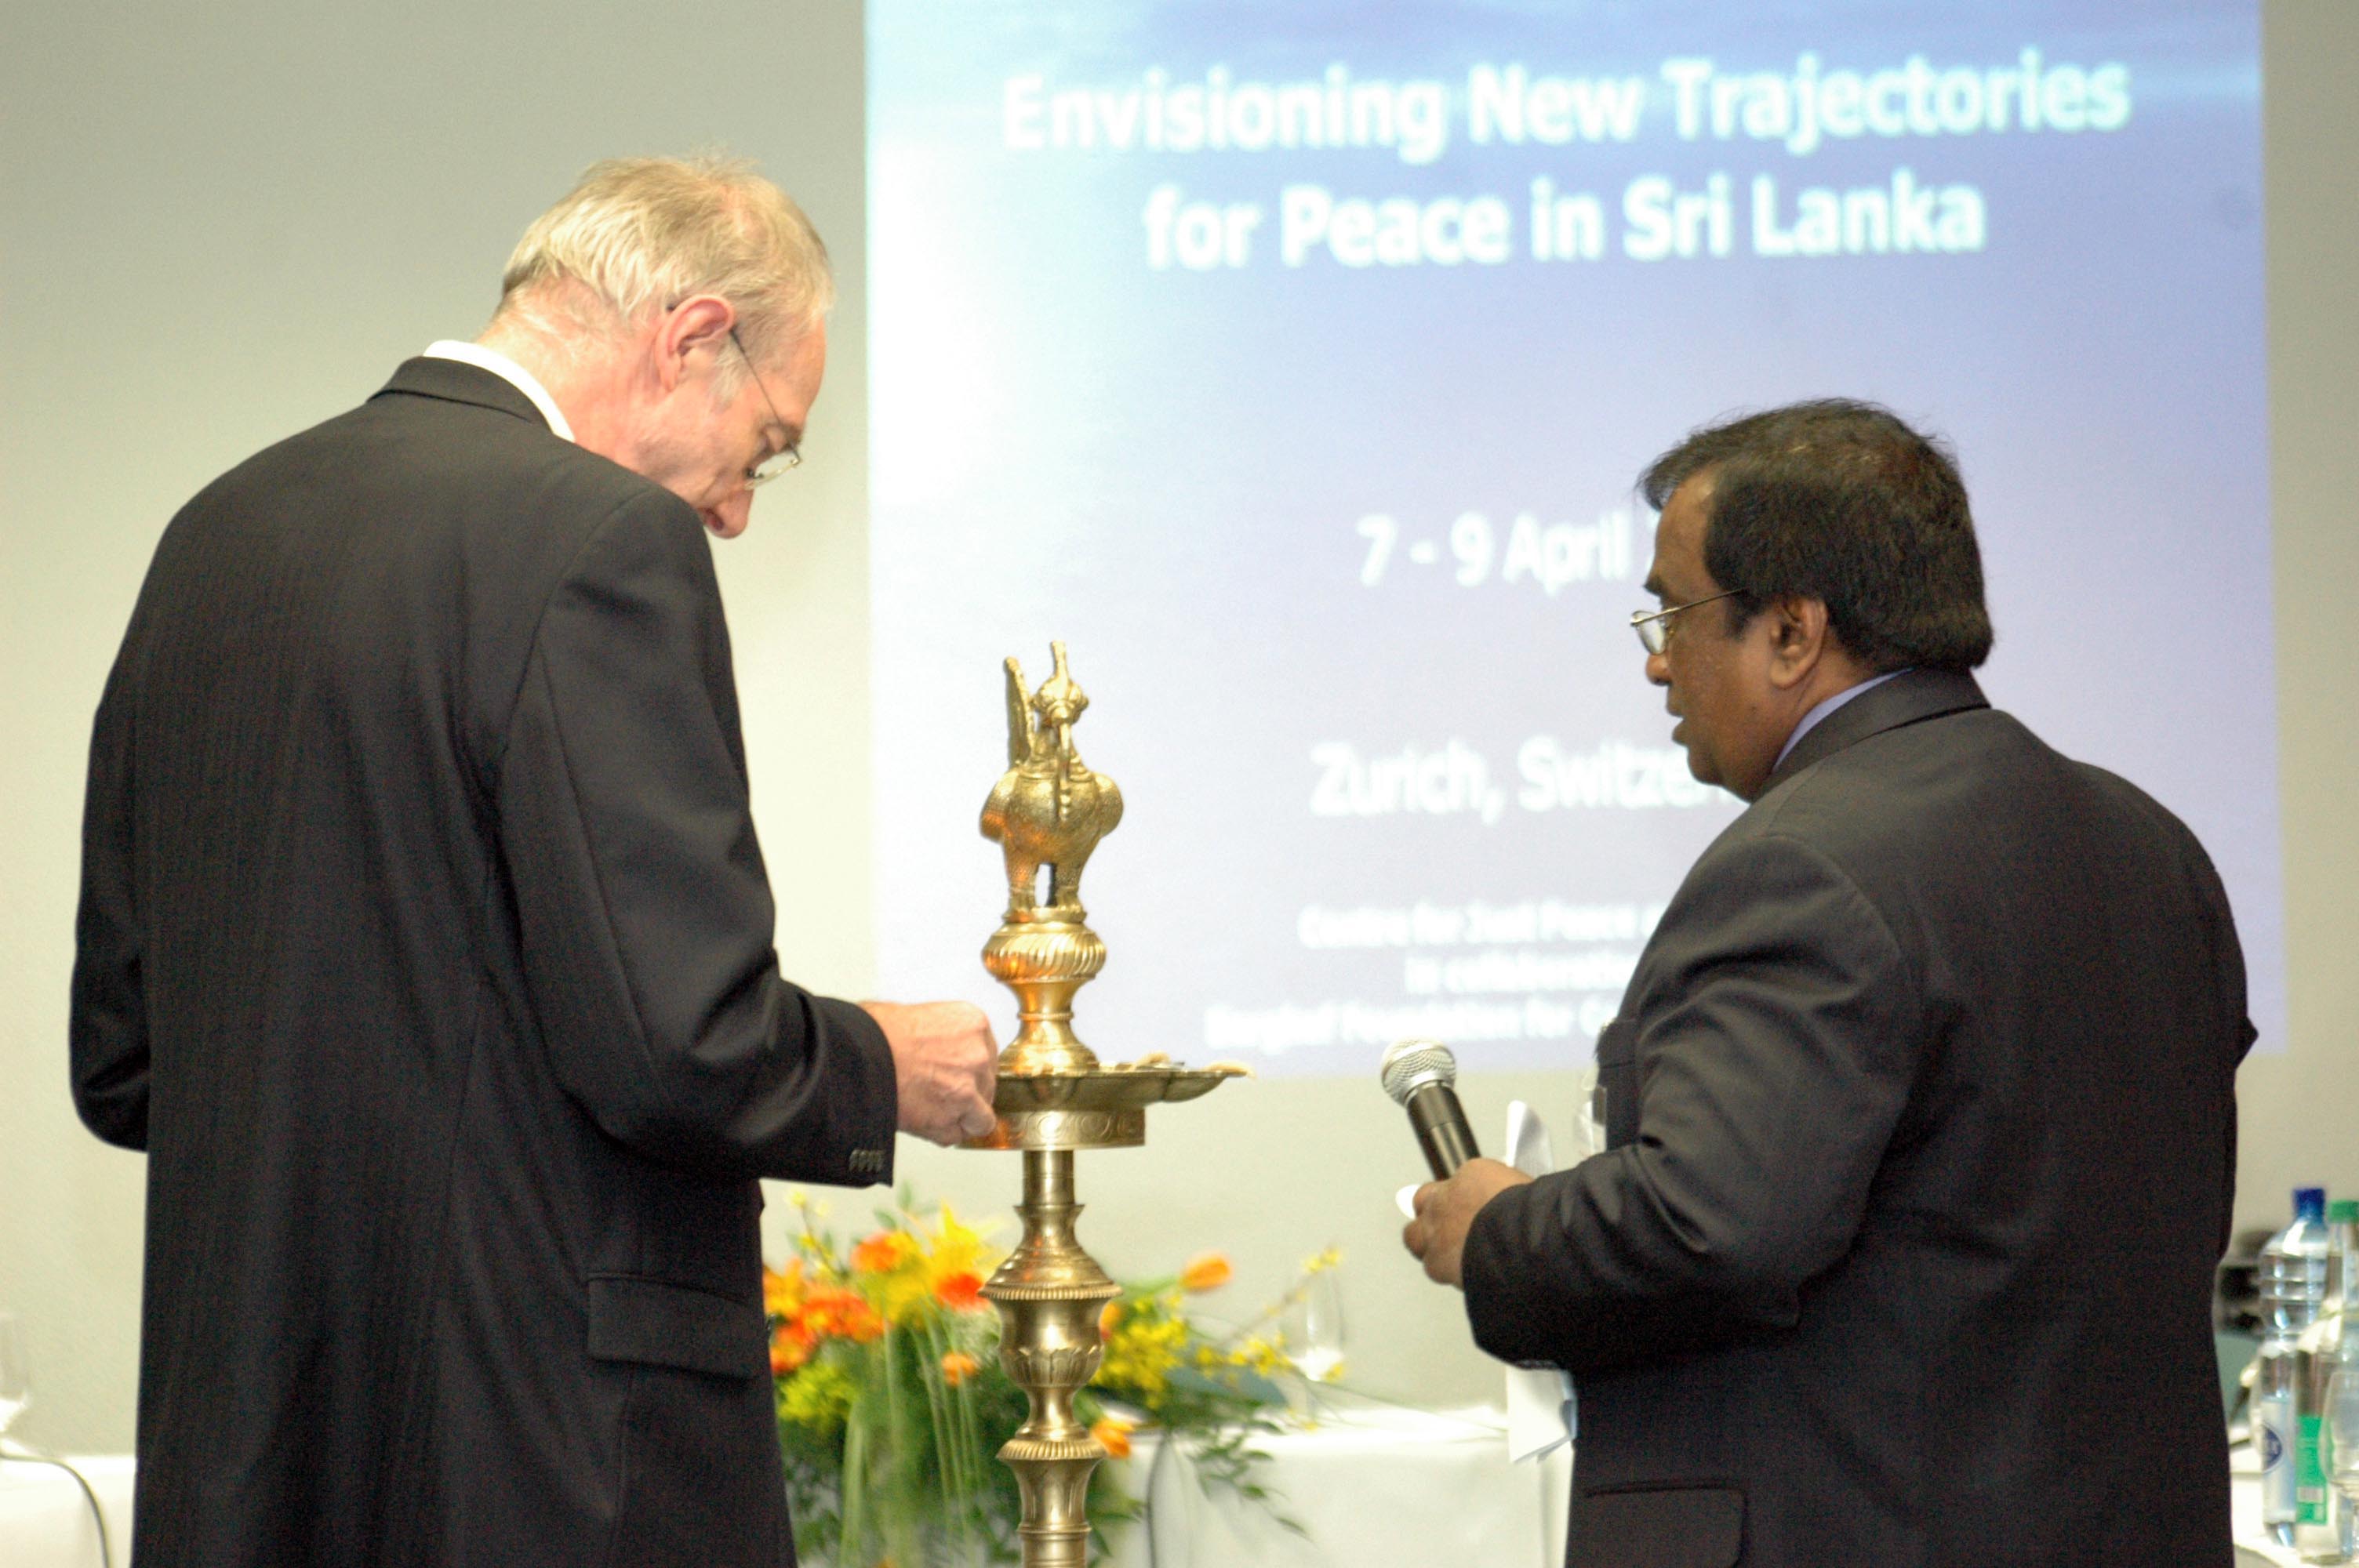 Envisioning New Trajectories for Peace in Sri Lanka 